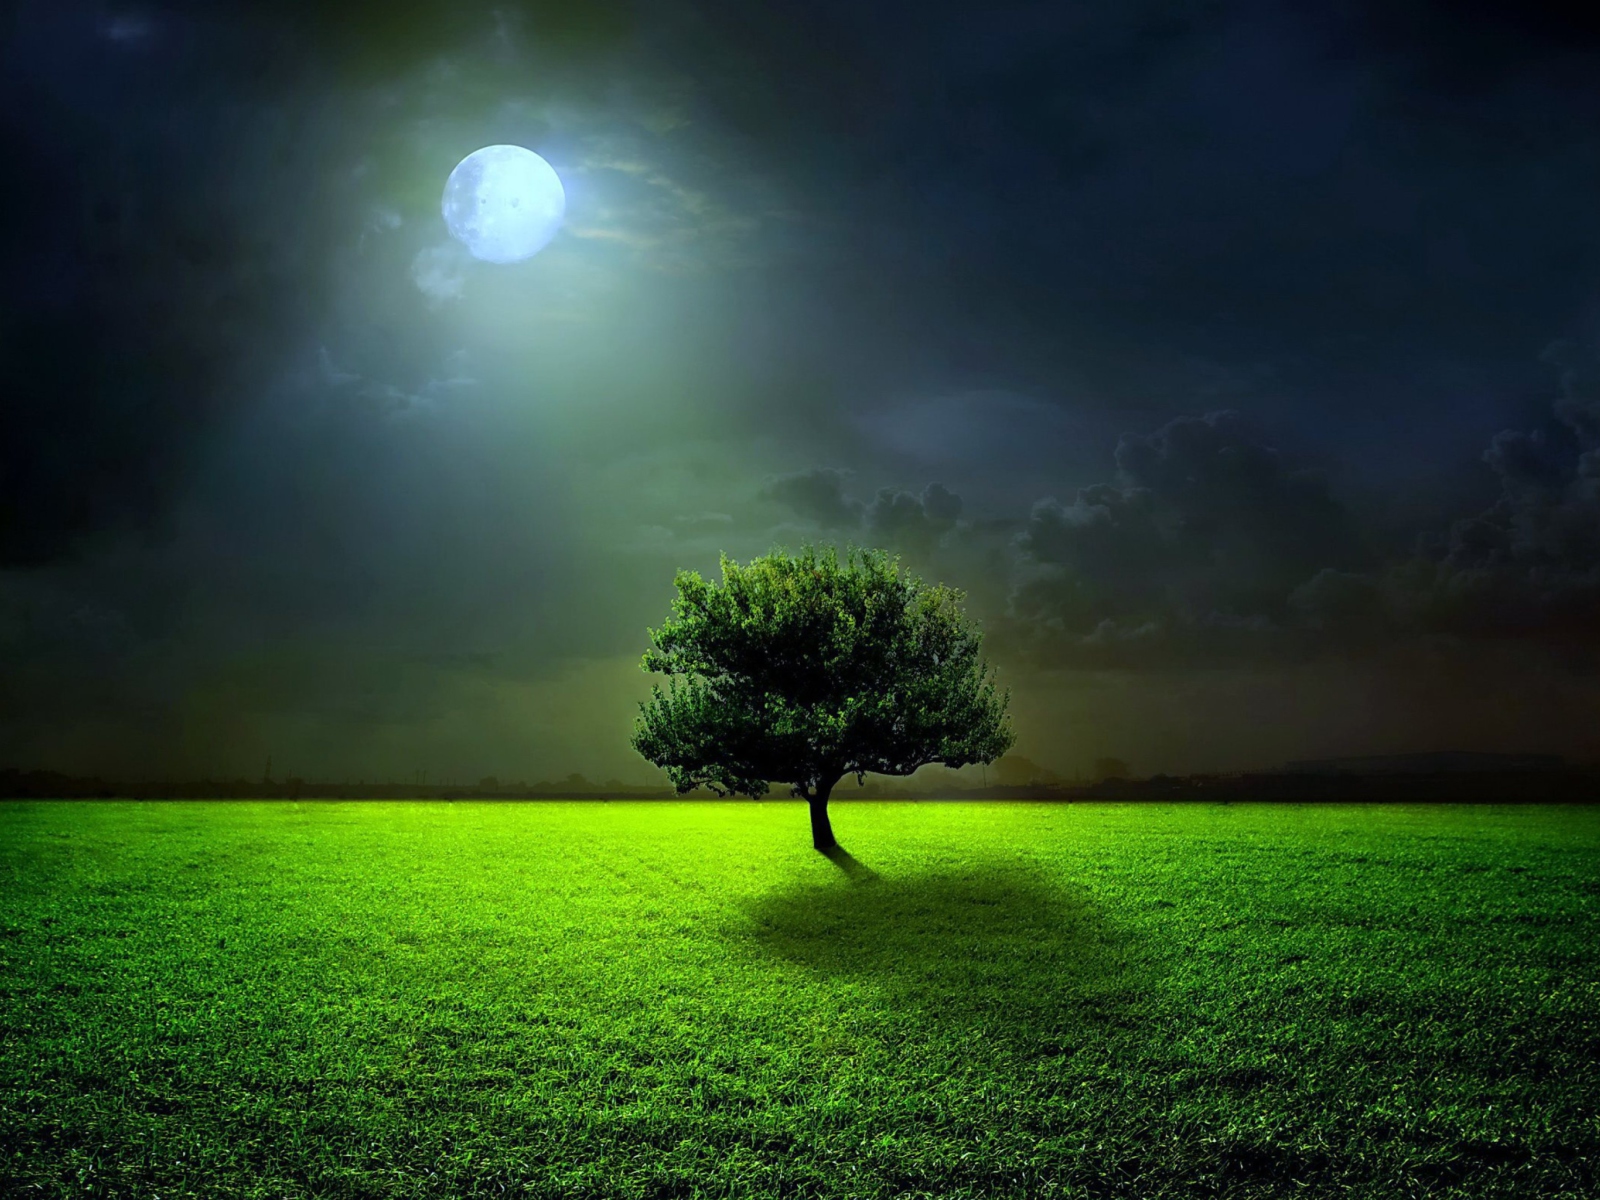 Evening With Lonely Tree wallpaper 1600x1200